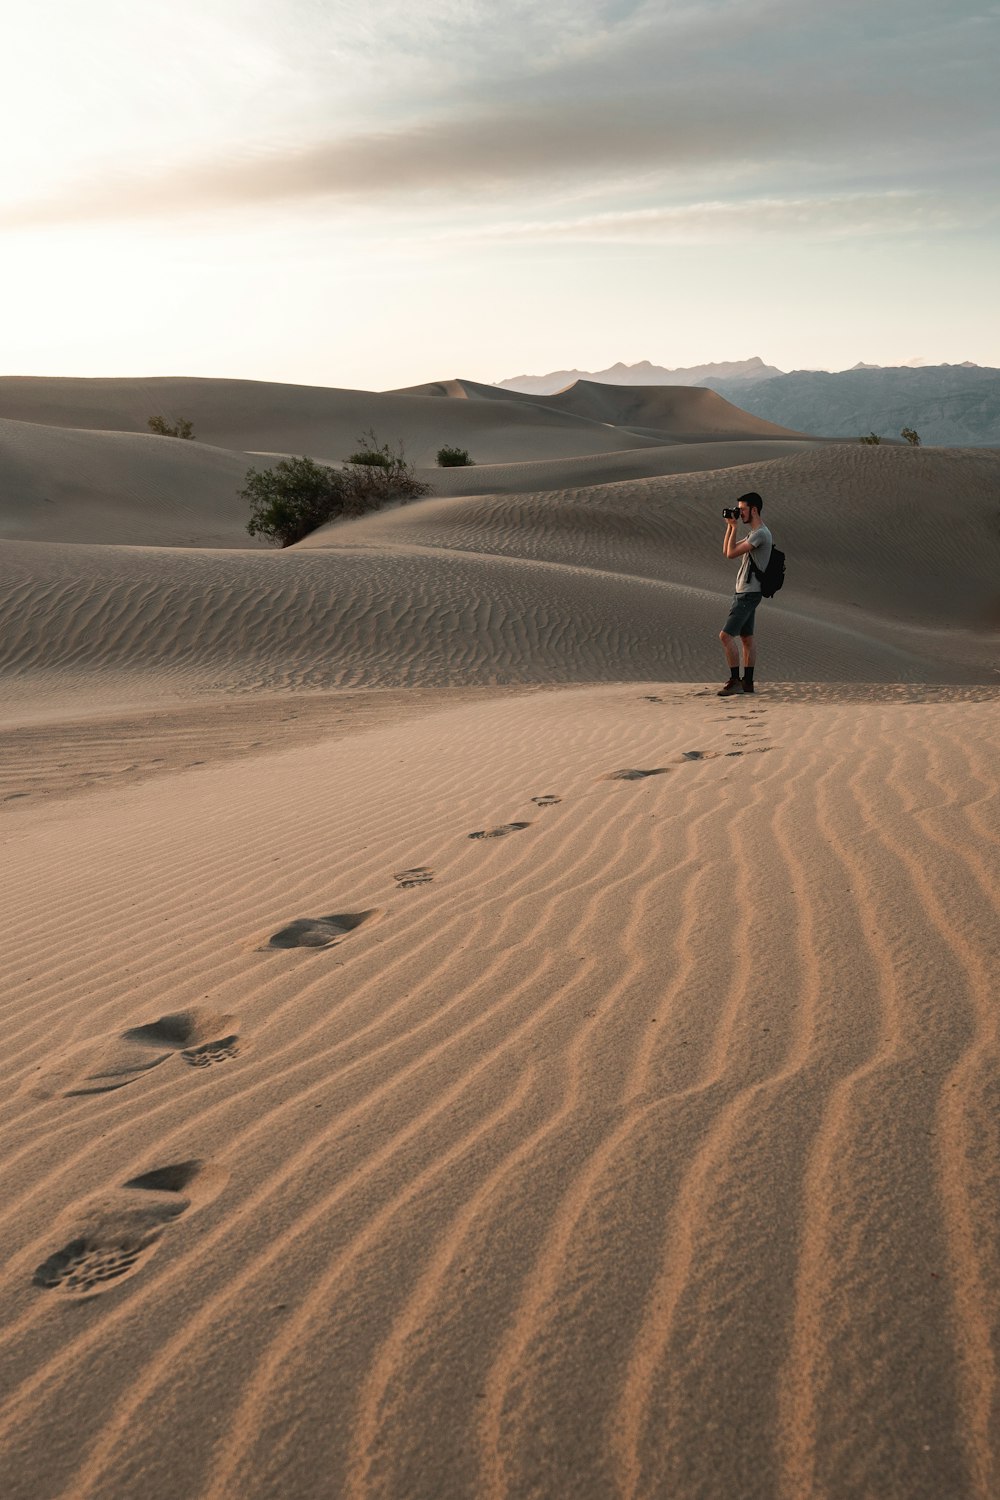 a person standing in a desert